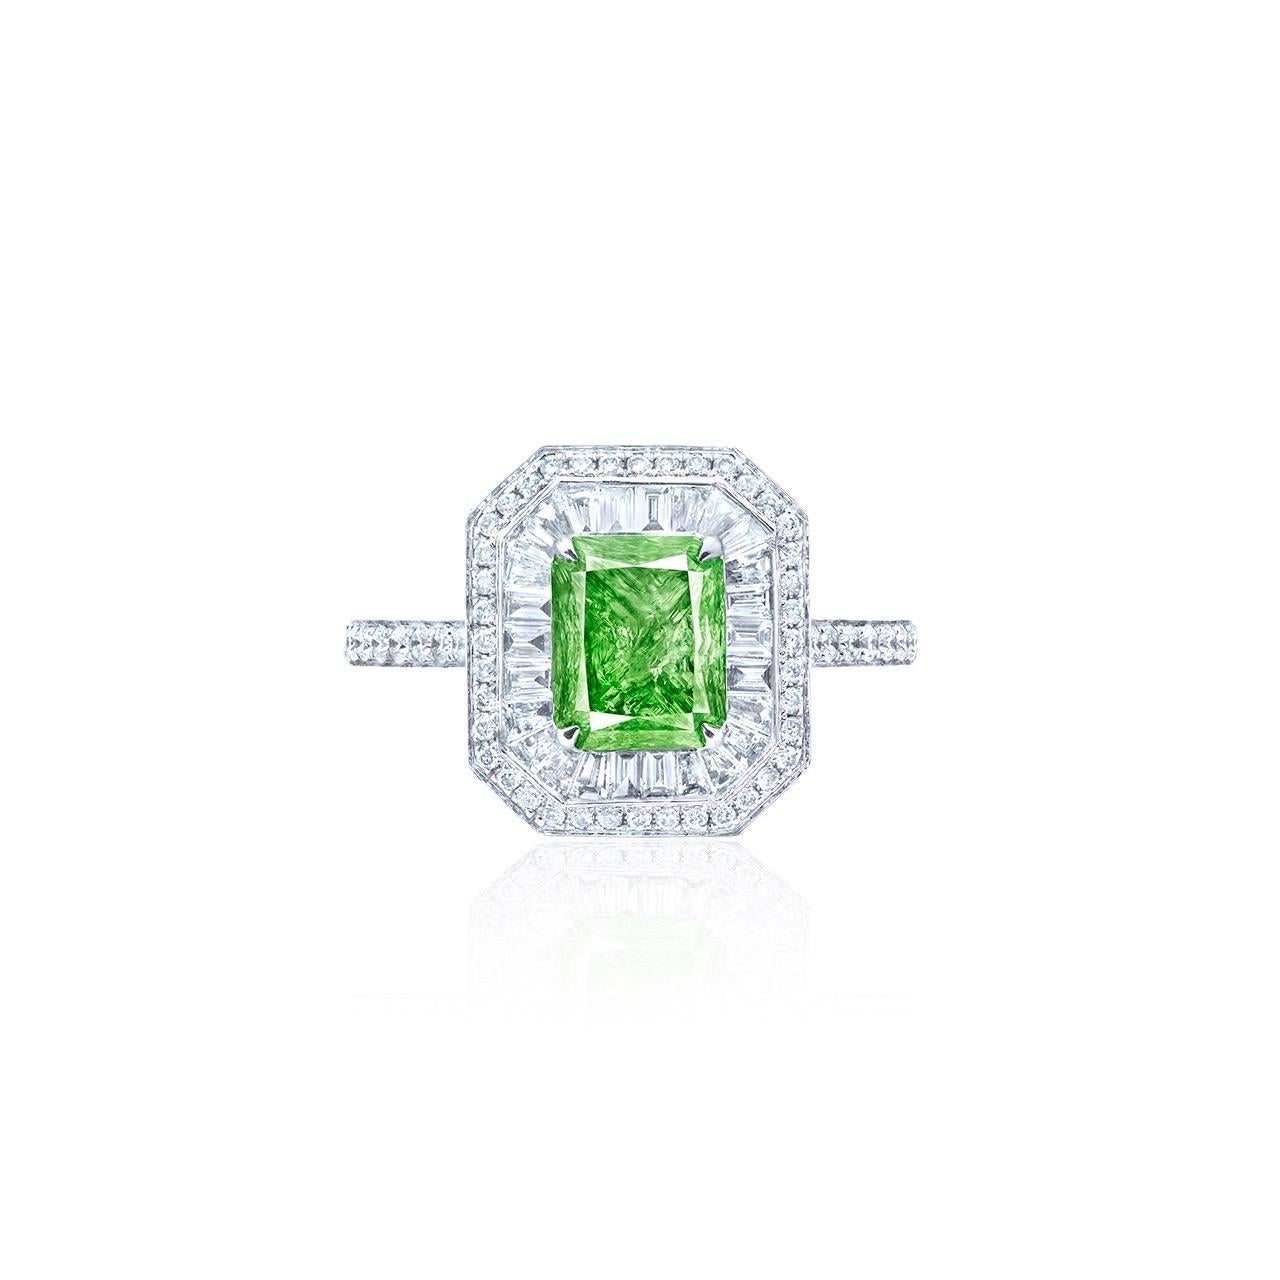 From Emilio Jewelry New York, a well known dealer/wholesaler located on New York's iconic Fifth Avenue,

Gia certified natural fancy intense green diamond center with no overstone 1.60+ carats 
mouting 80 white diamonds totaling about 0.57